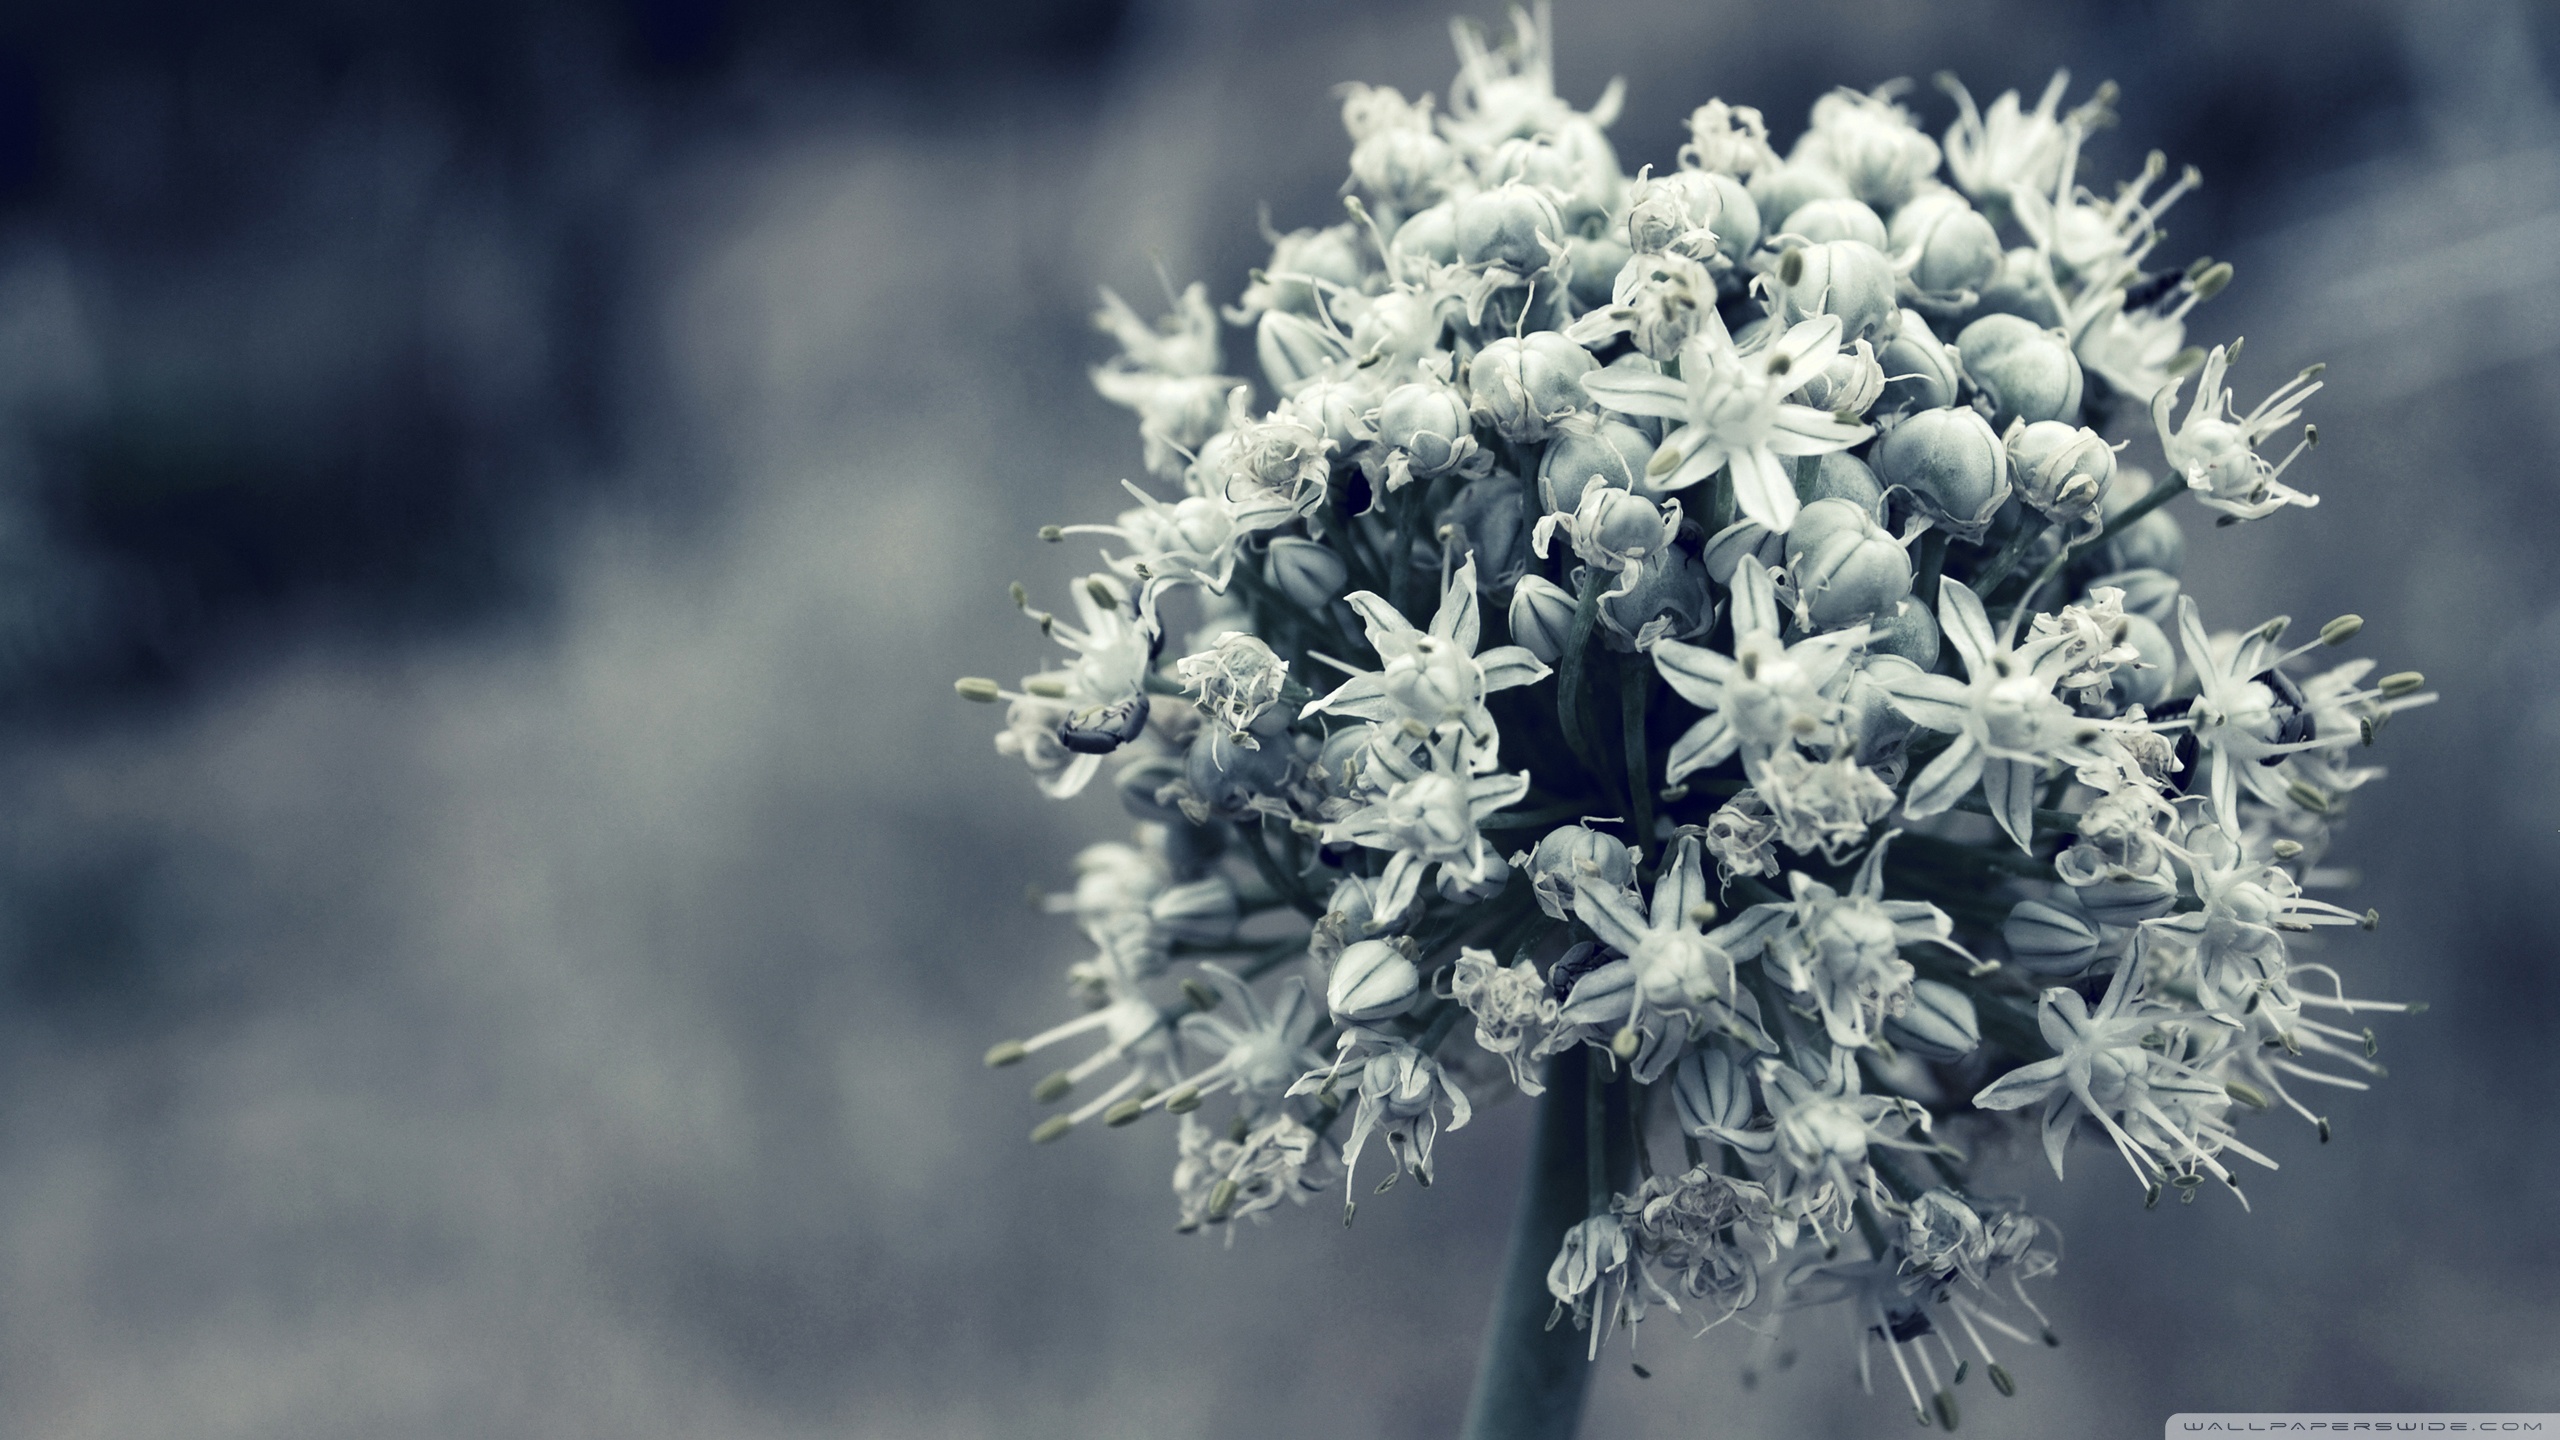 Standard - Facebook Cover Photos White Flowers , HD Wallpaper & Backgrounds